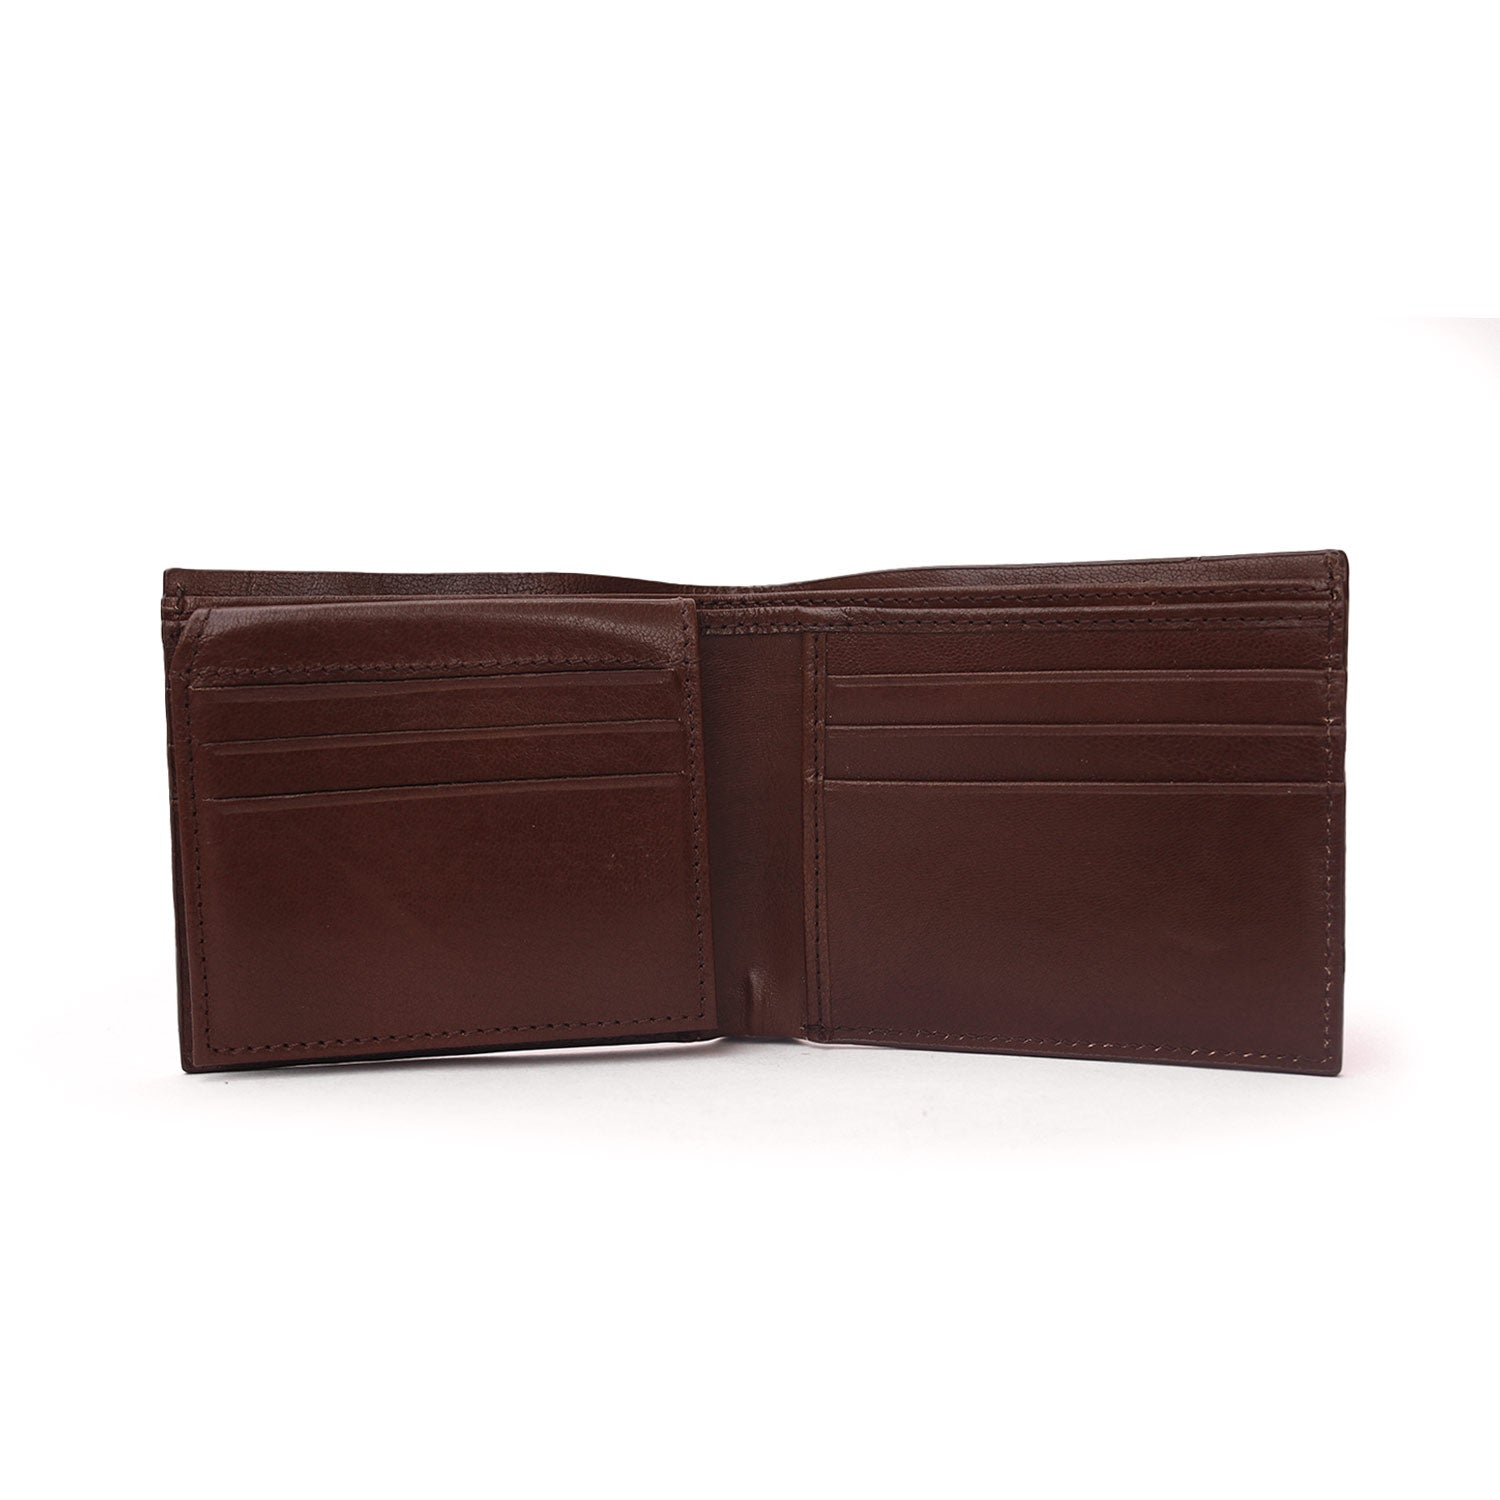 Lenticular Leather Wallet And Clutch Combo